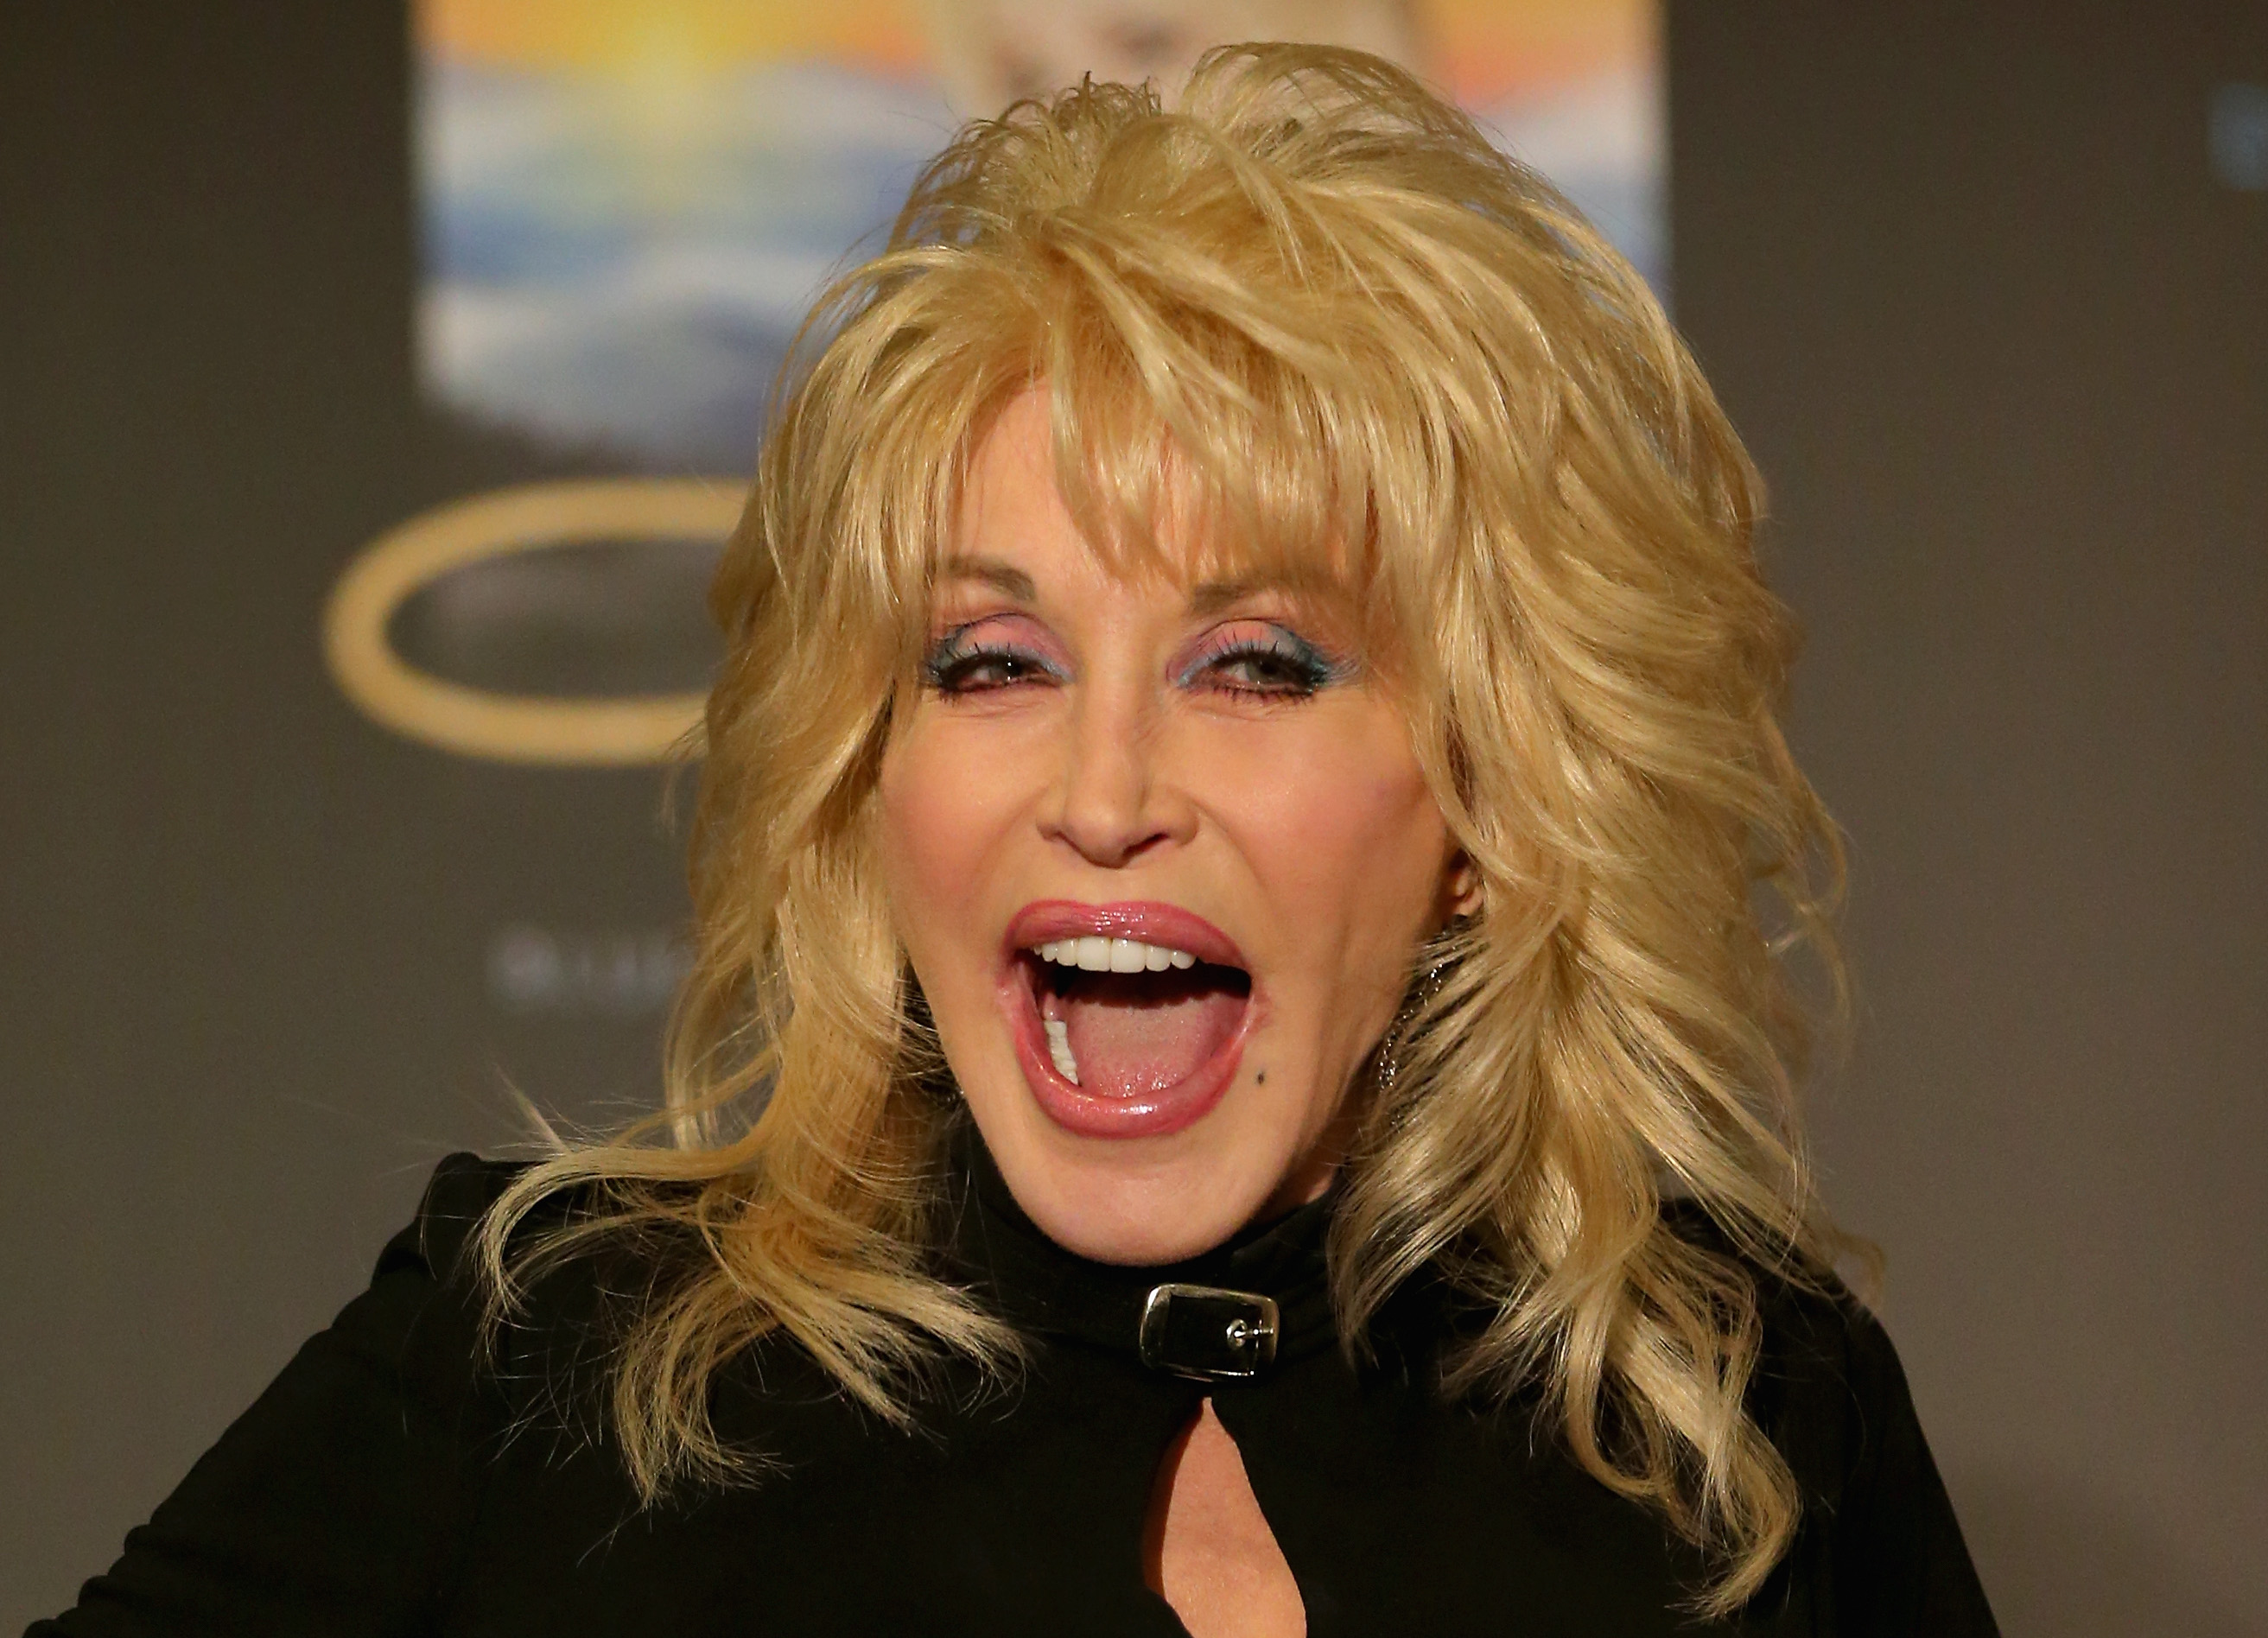 Dolly Parton speaks to the media during a press conference at Rod Laver Arena on February 11, 2014 in Melbourne, Australia.